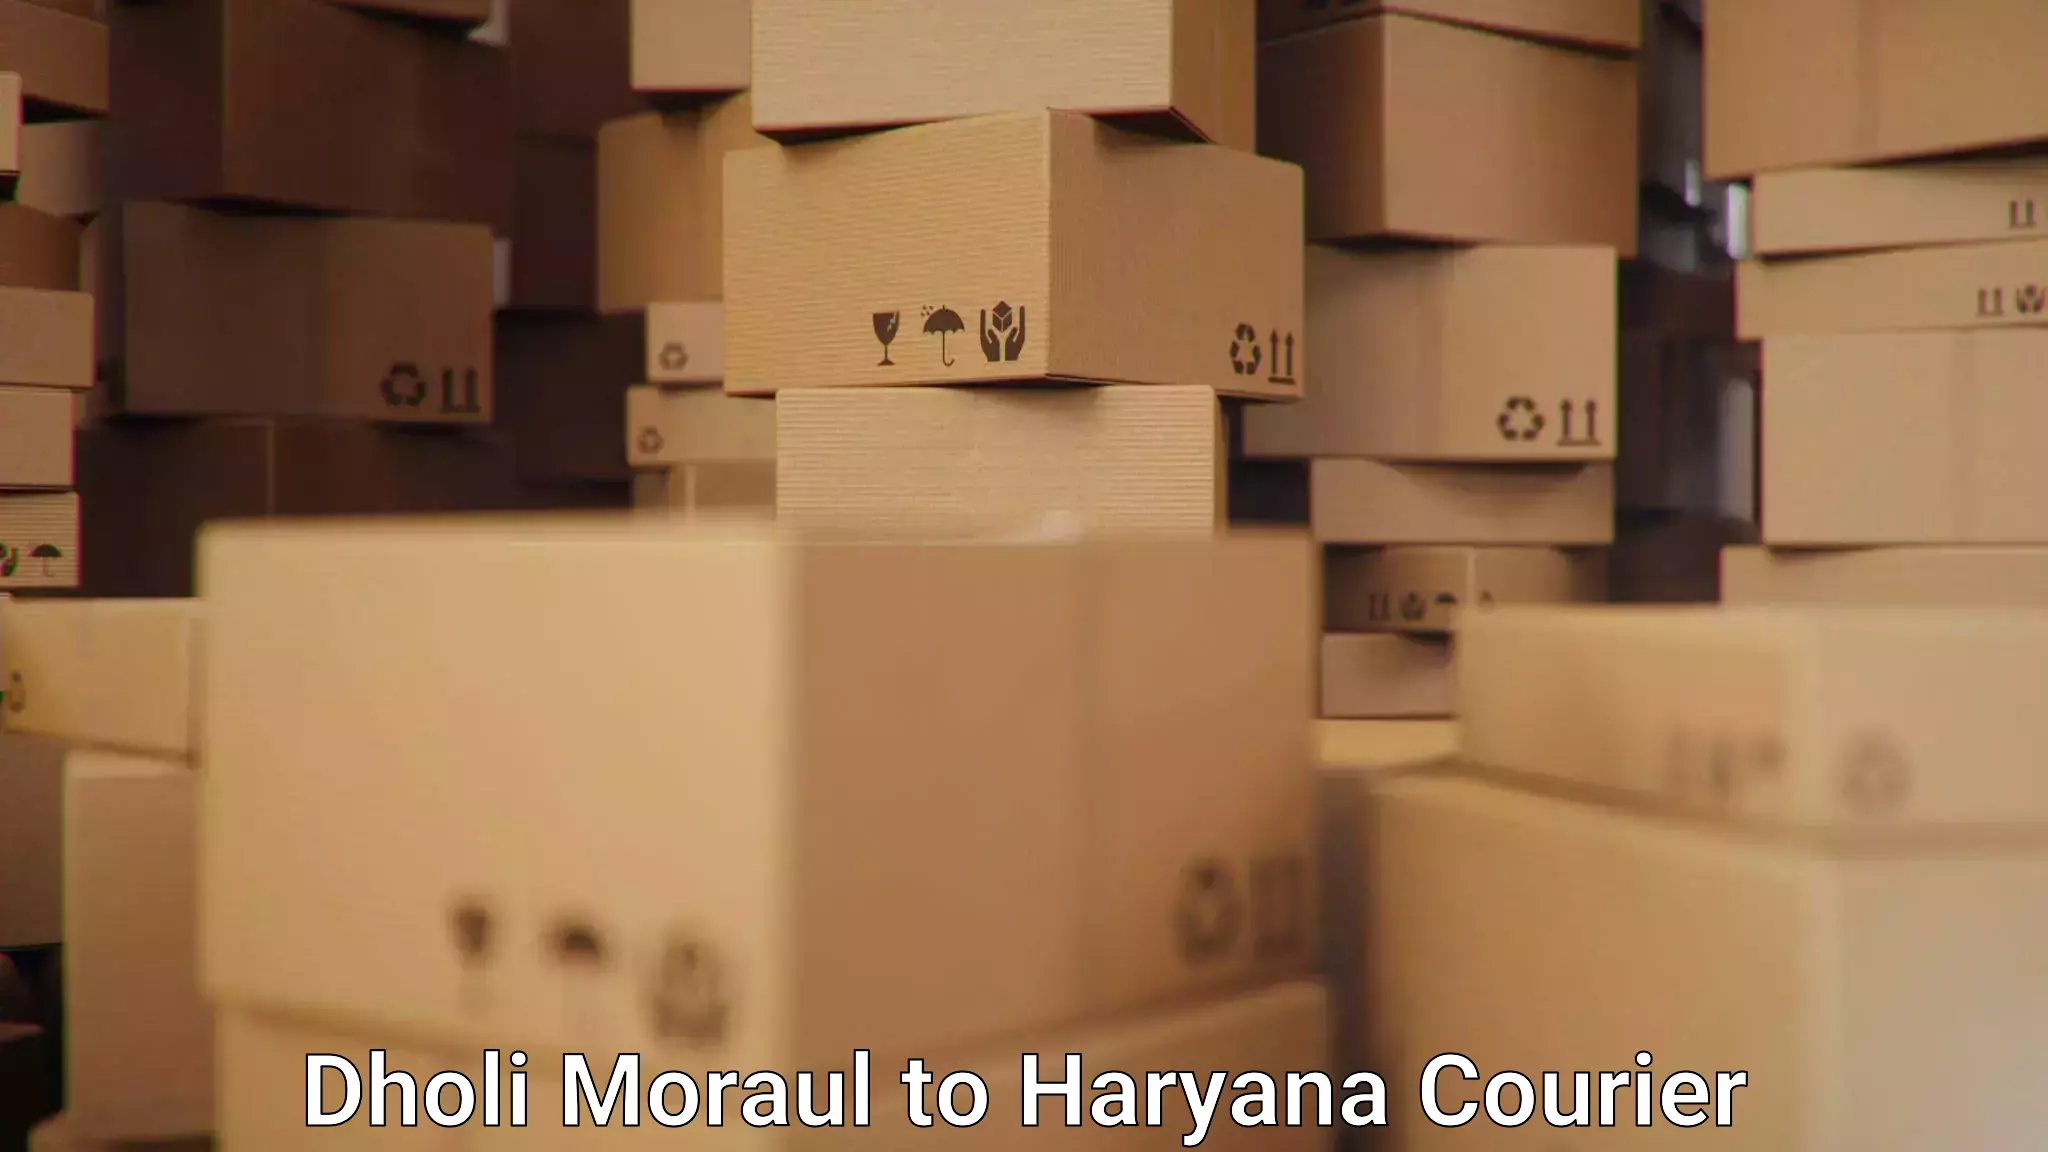 Pharmaceutical courier Dholi Moraul to Sonipat